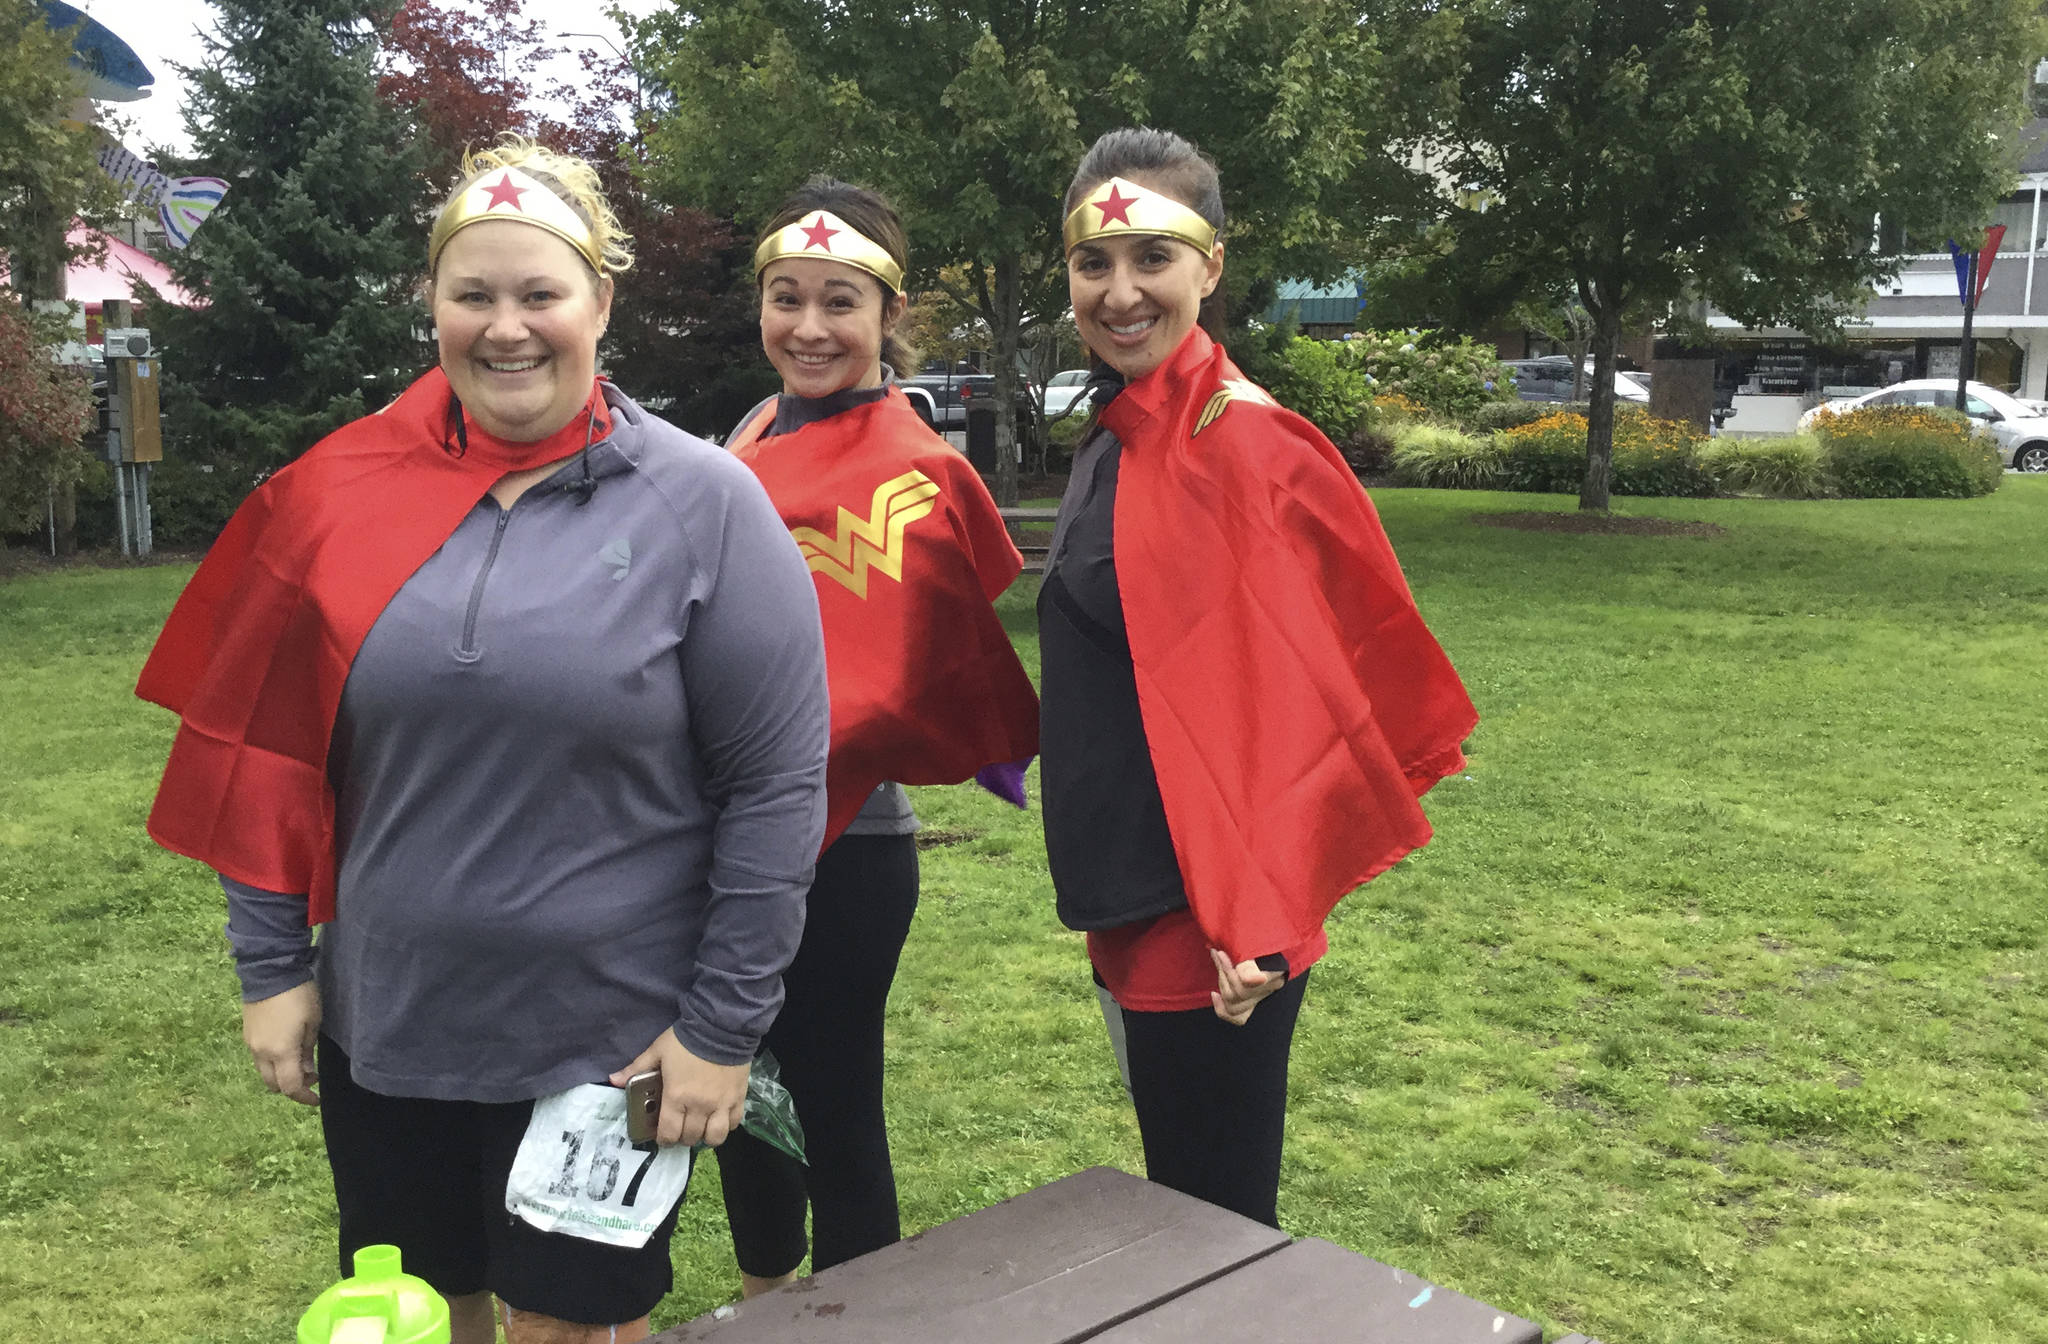 Superheroes lace up for 11th Annual Friendship Walk and 5K Run in Arlington